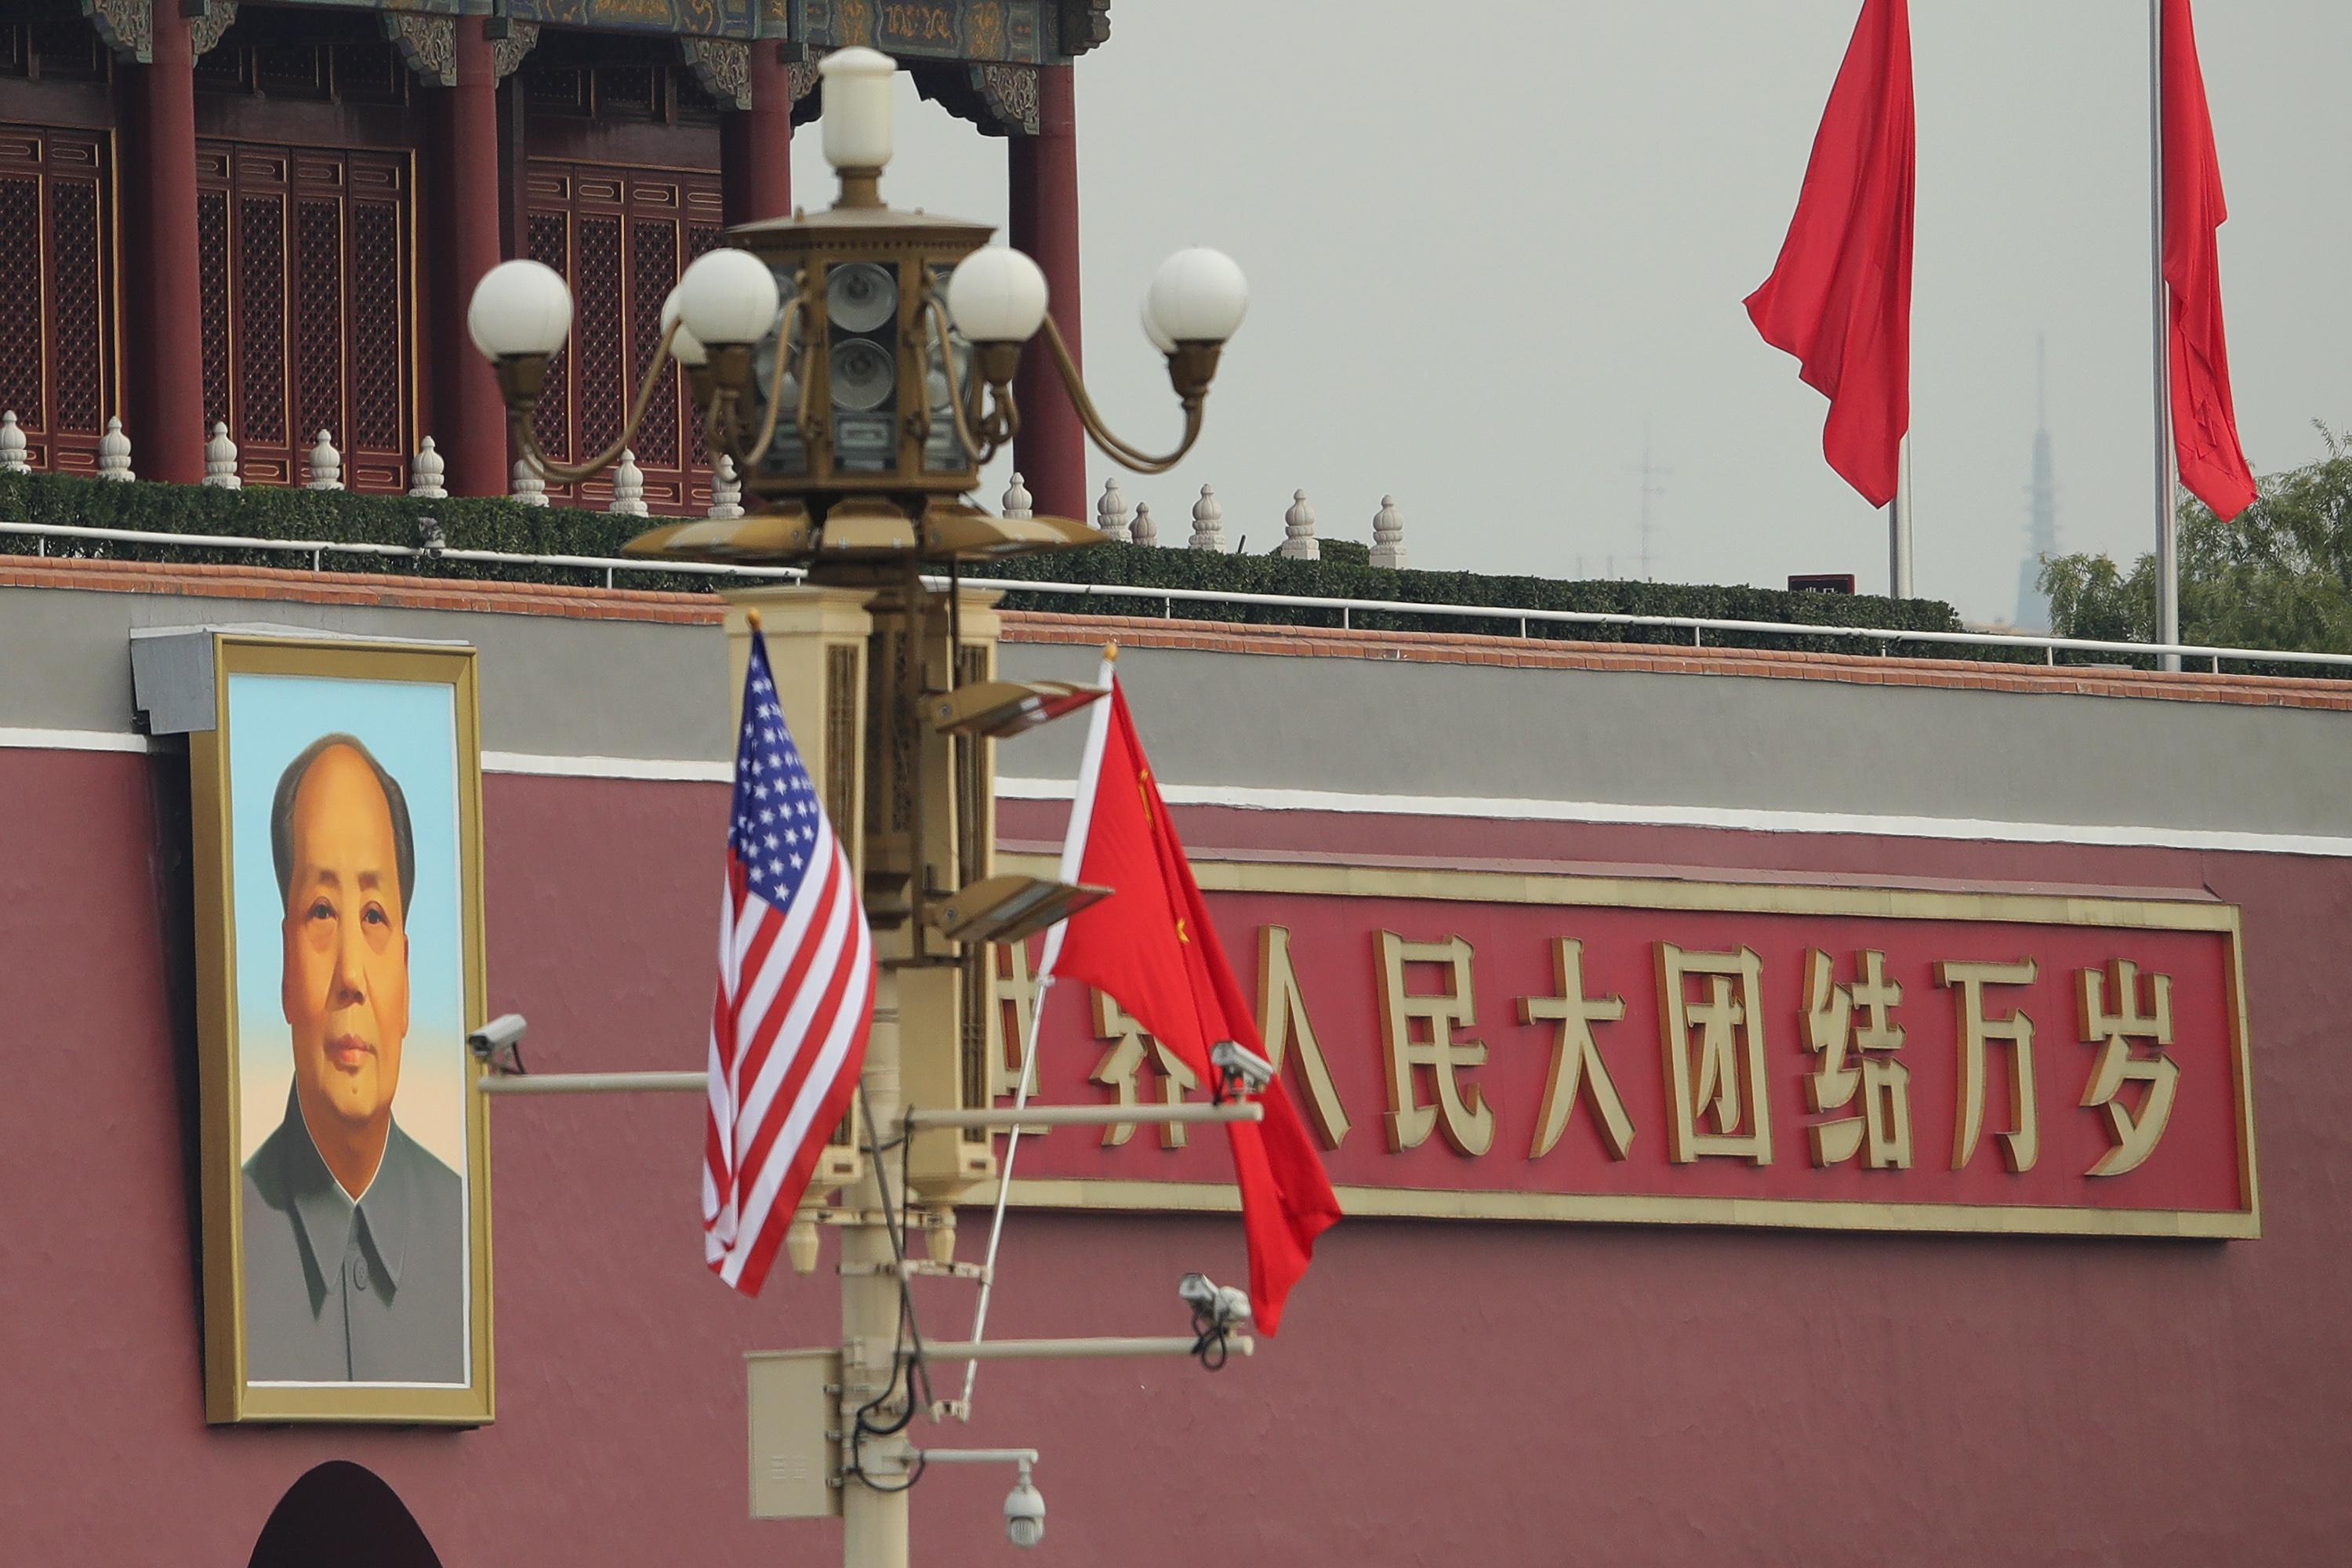 A U.S. flag and a Chinese flag hang on a pole in front of the portrait of Mao Zedong outside the palace